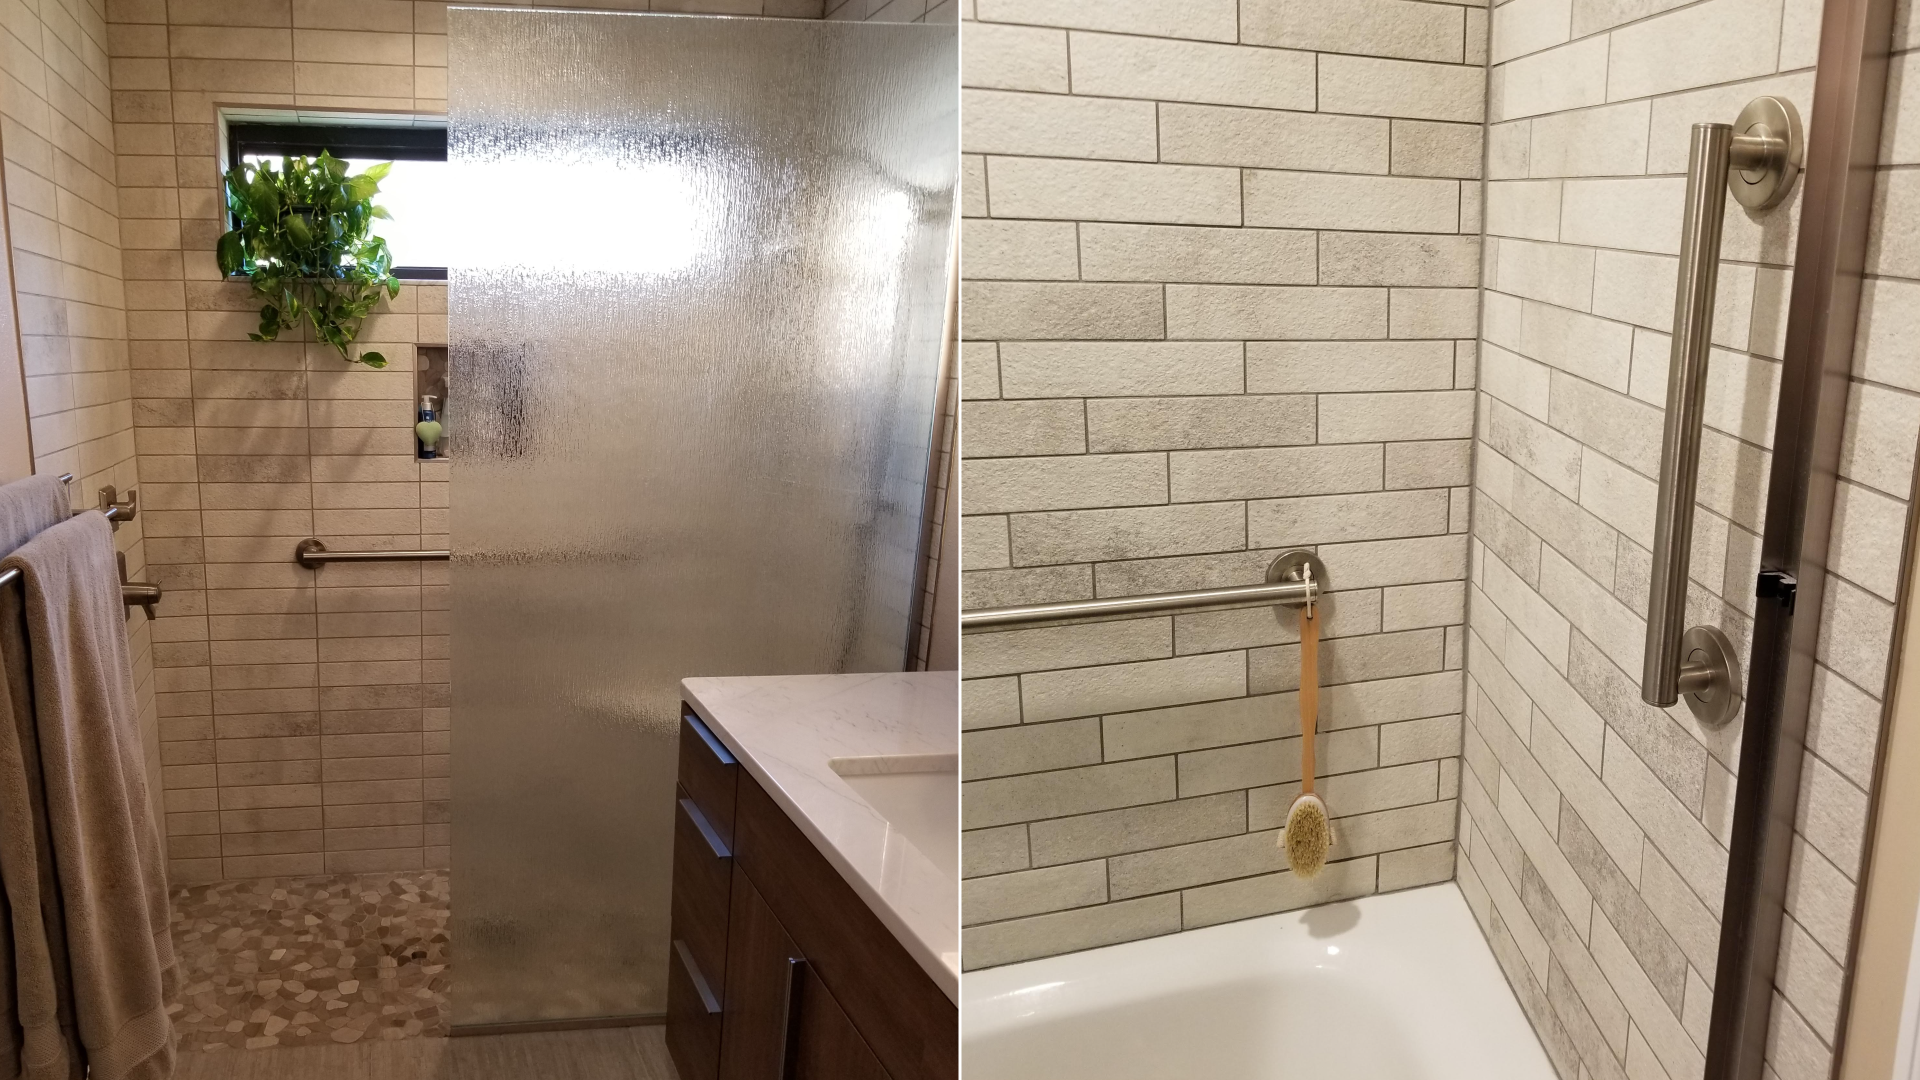 Two photos of bathrooms, one showing a walk-in shower with sand-colored tiles and a green pothos plant on the windowsill, the other of a bathtub with silver grab bars attached to the gray tile walls.